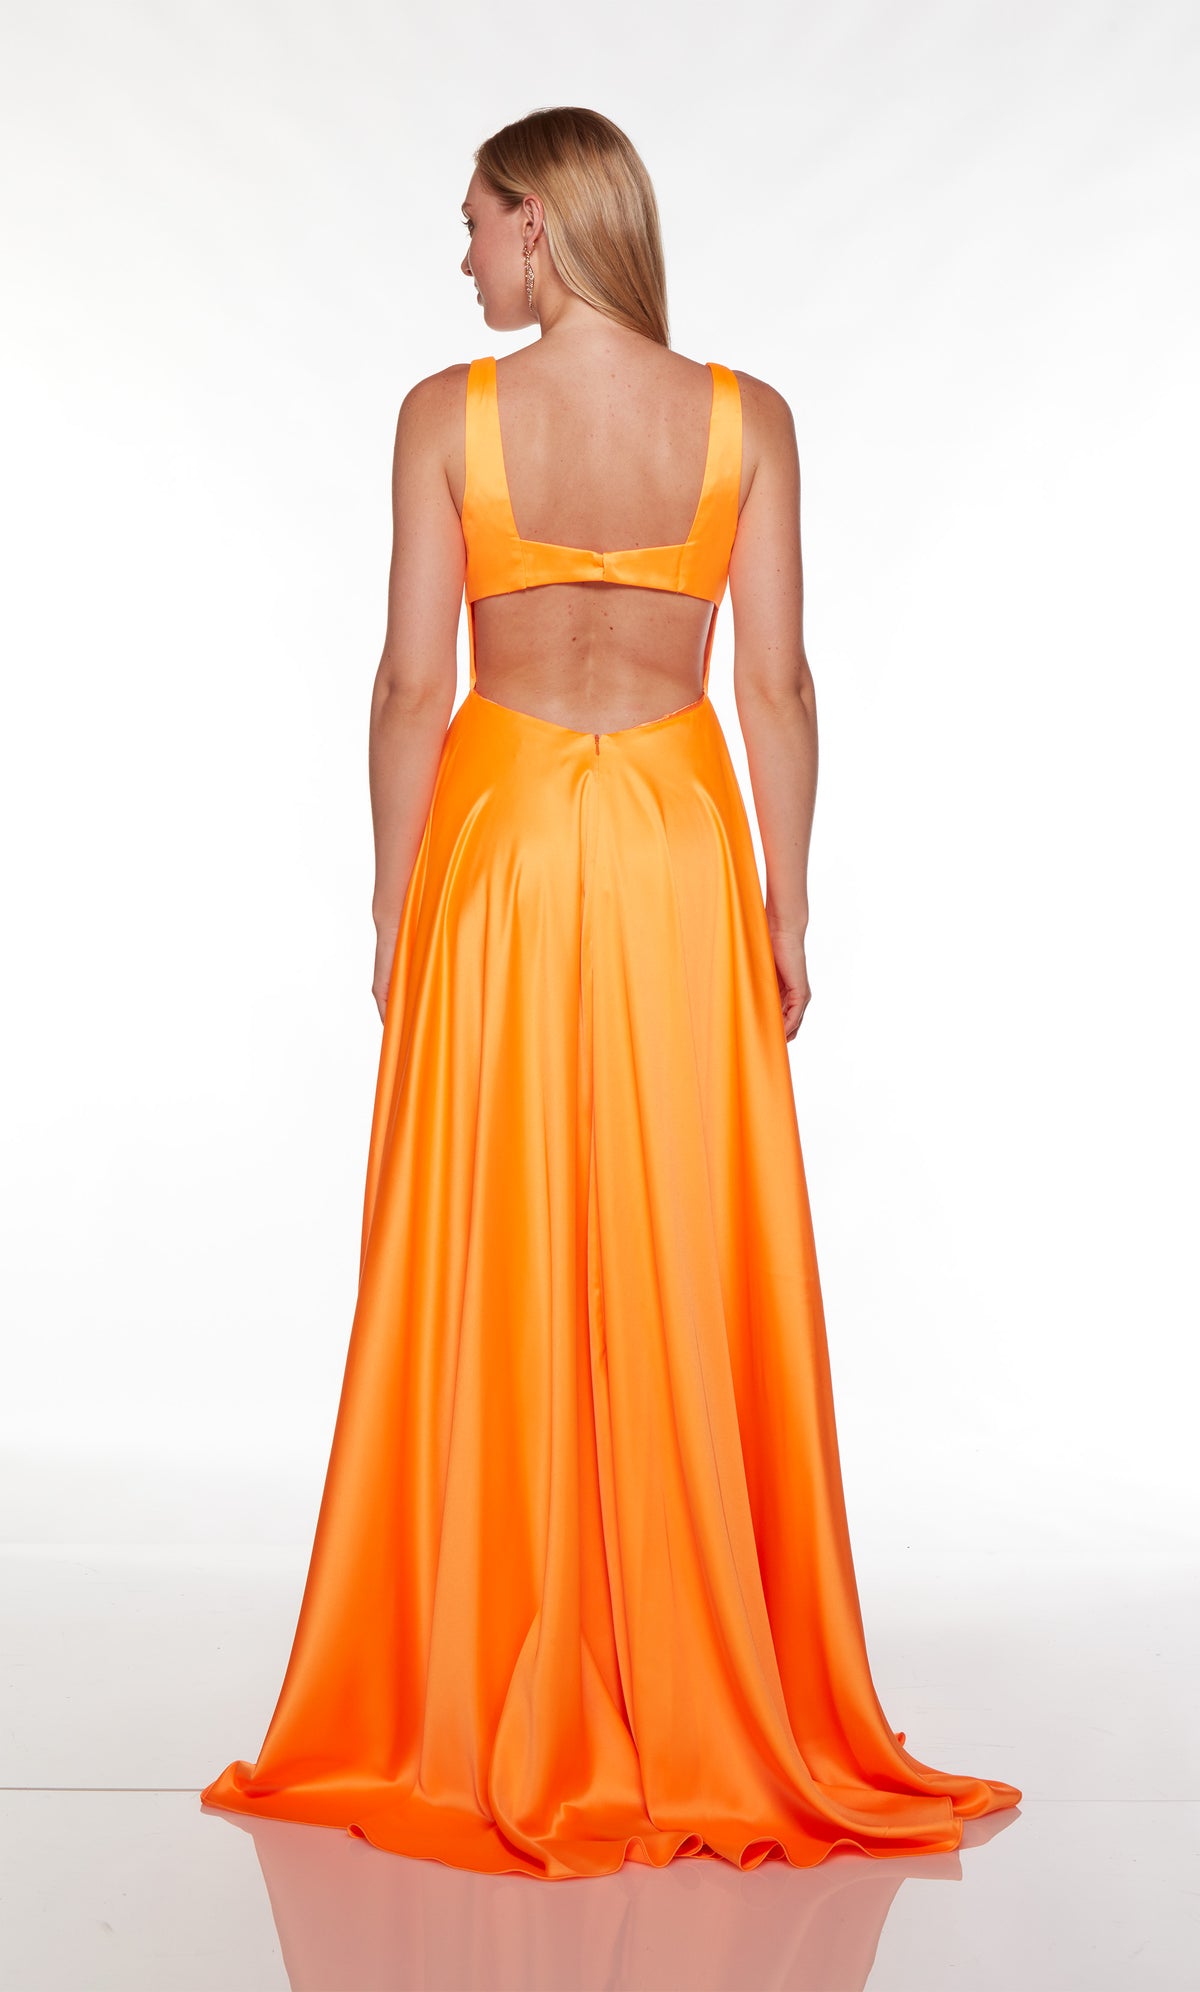 Orange prom dress with a cutout back and train.